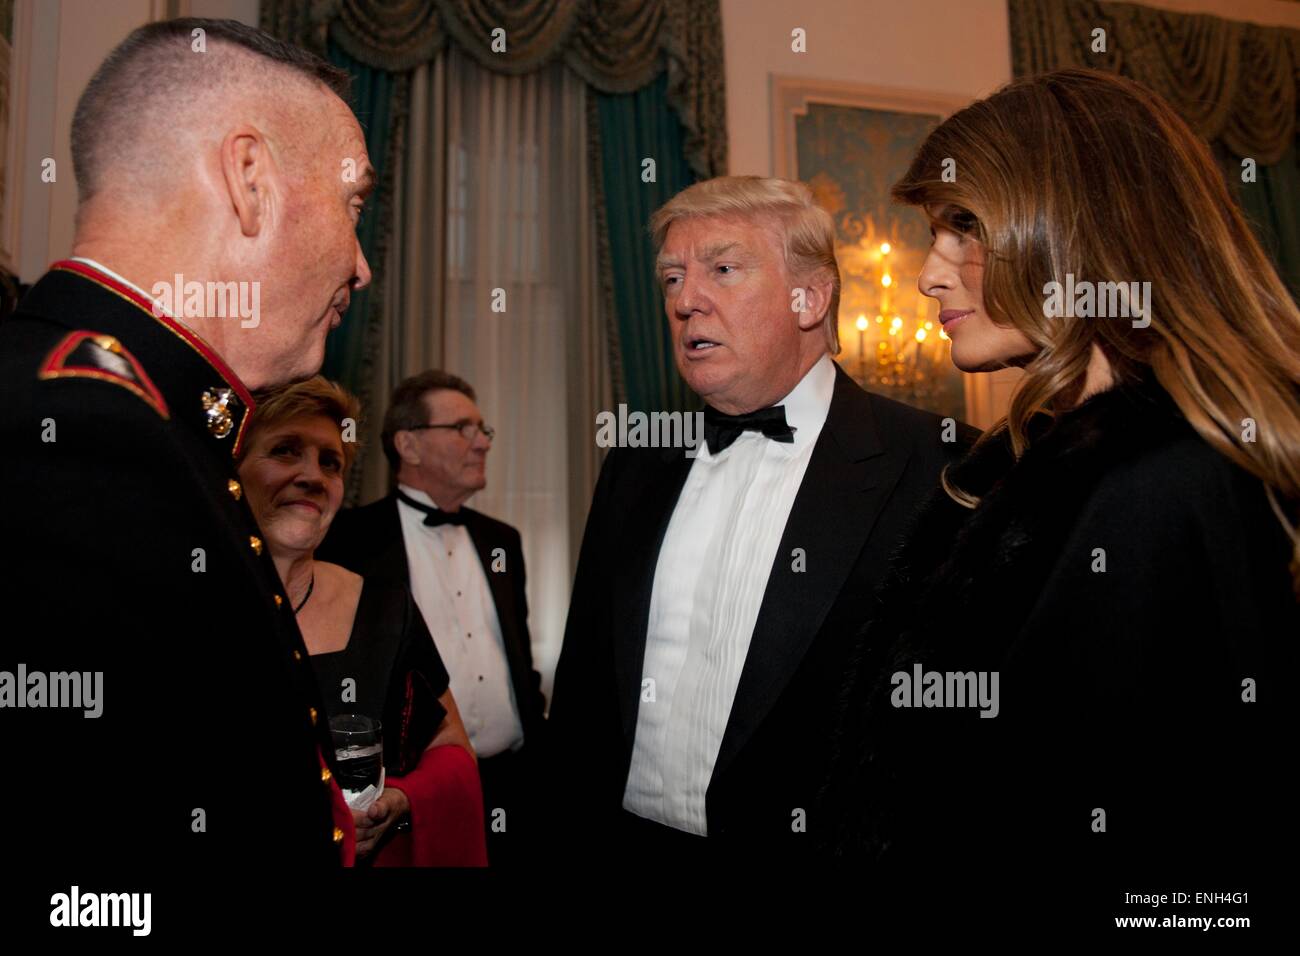 U.S. Marine Corps Gen. Joseph F. Dunford, Jr. chats with Donald Trump during the 20th Annual Semper Fidelis Gala dinner April 22, 2015 in New York City. President Obama announced May 5, 2015 that Dunford will become the new Chairman of the Joint Chiefs. Stock Photo